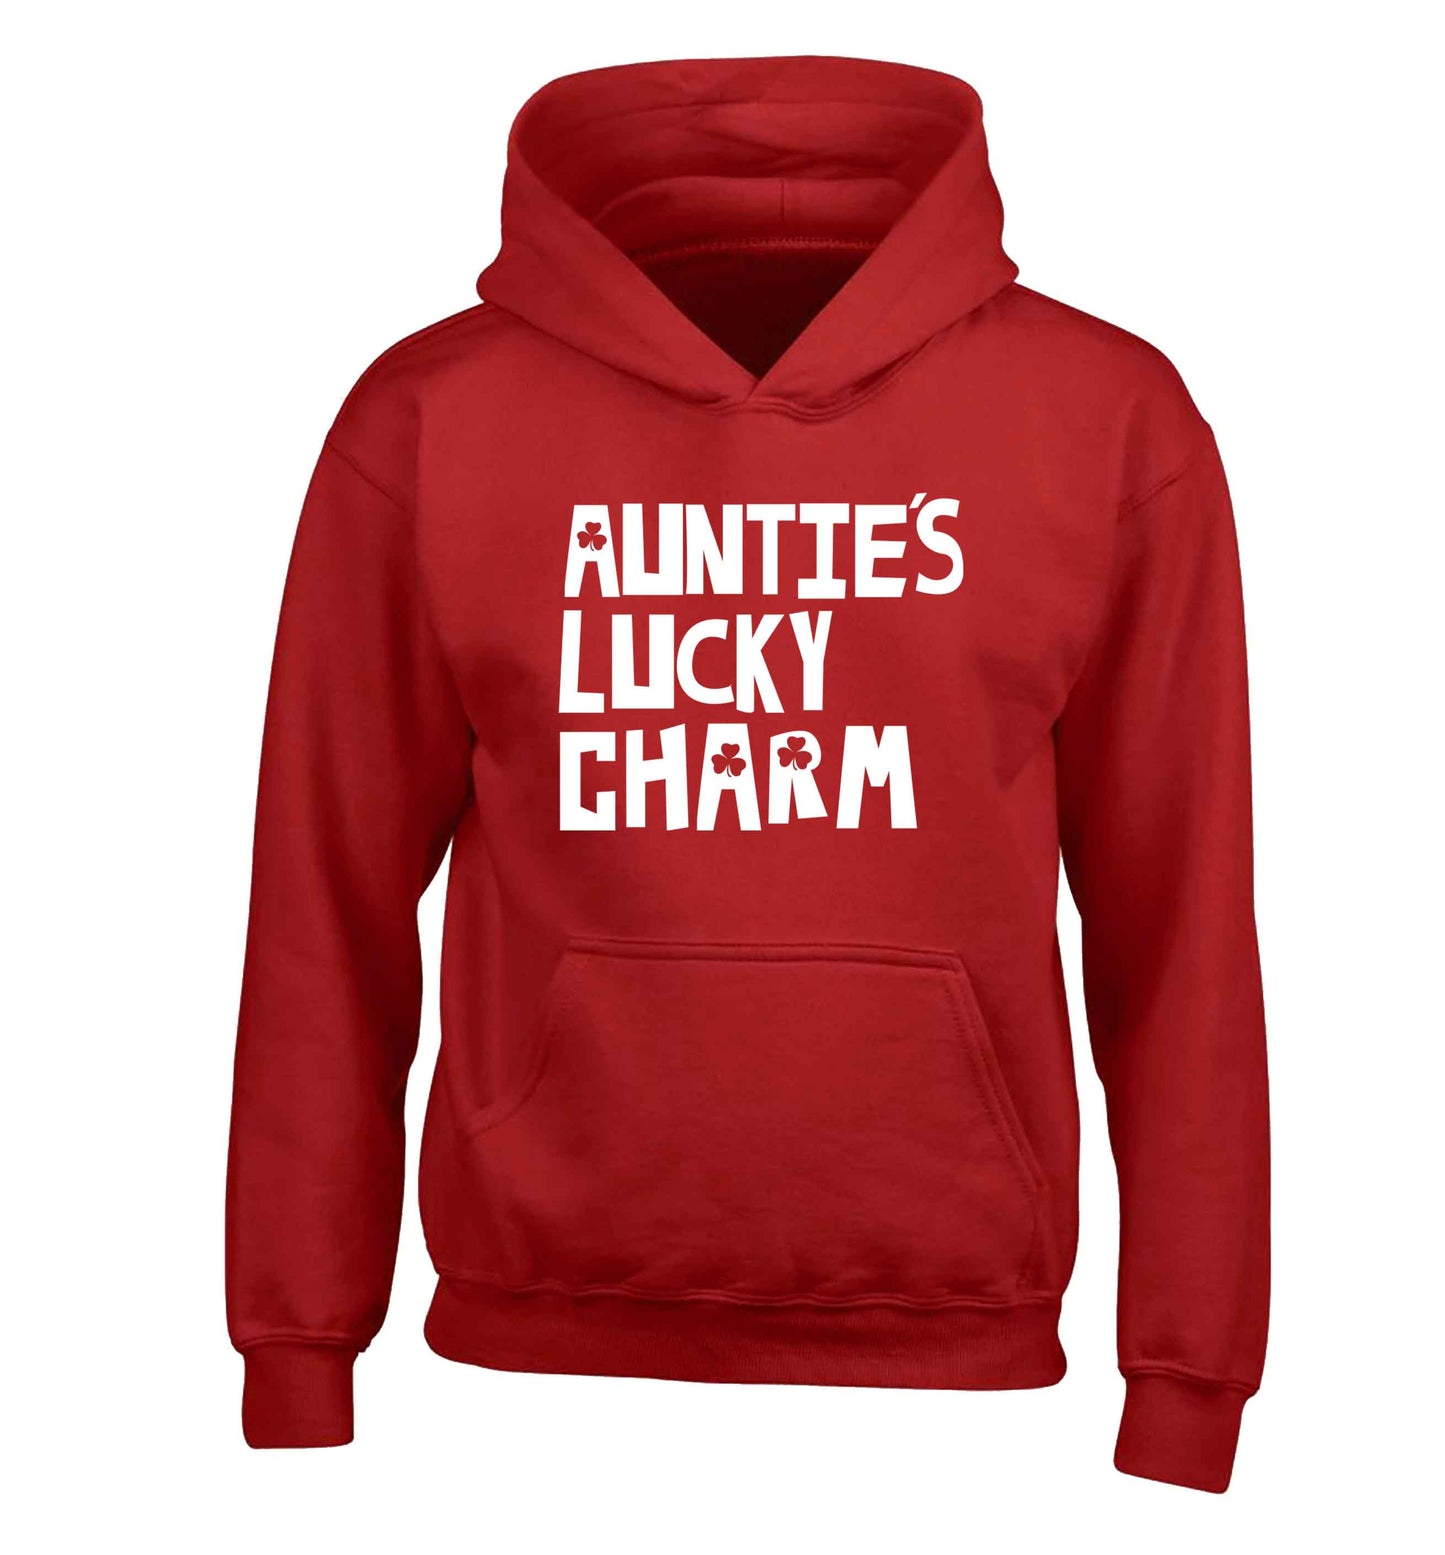 Auntie's lucky charm children's red hoodie 12-13 Years